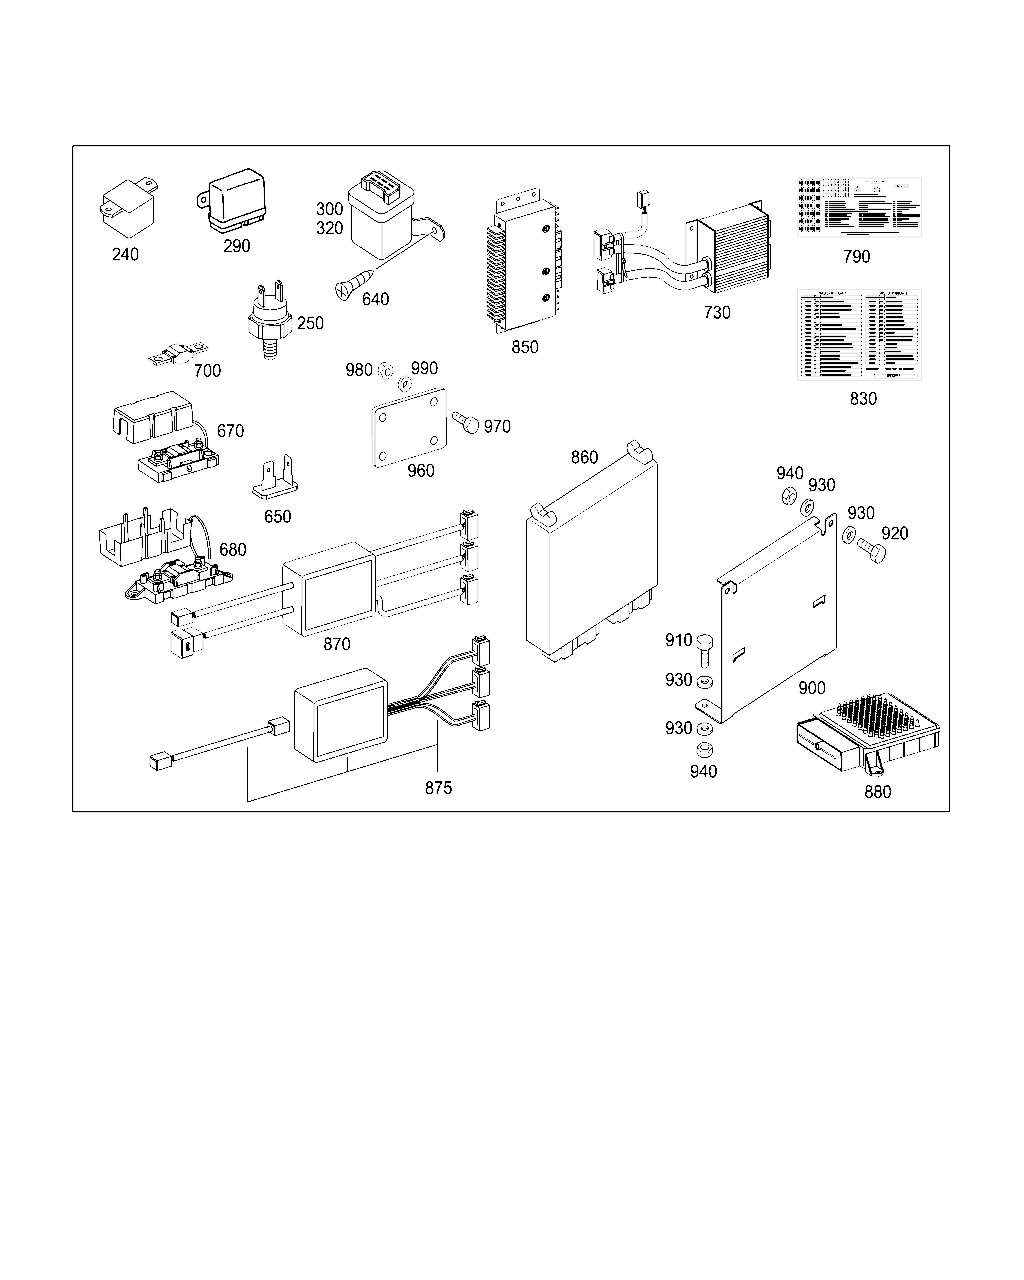 APPARATUS PLATE AND CONTROL UNITS [Автобус] MERCEDES [ЕВРОПА] [ШАССИ]OMC 1626 58